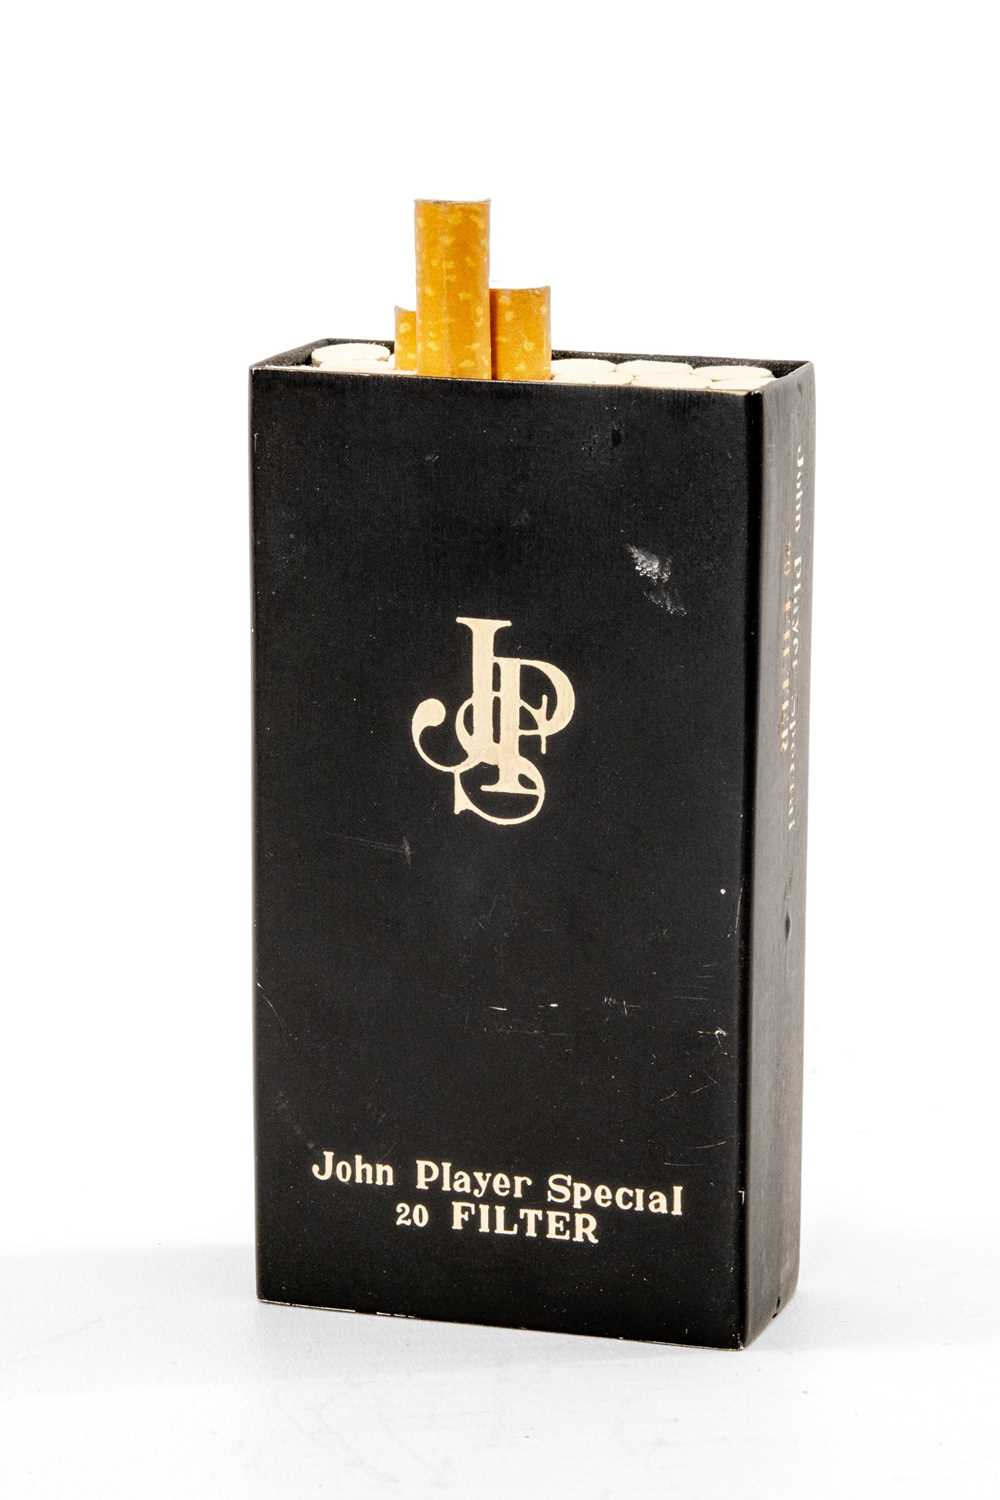 JPS "SPY CAMERA" DISGUISED IN A CIGARETTE PACKET, fitted with a KIEV-30 sub-miniature camera - Image 5 of 8